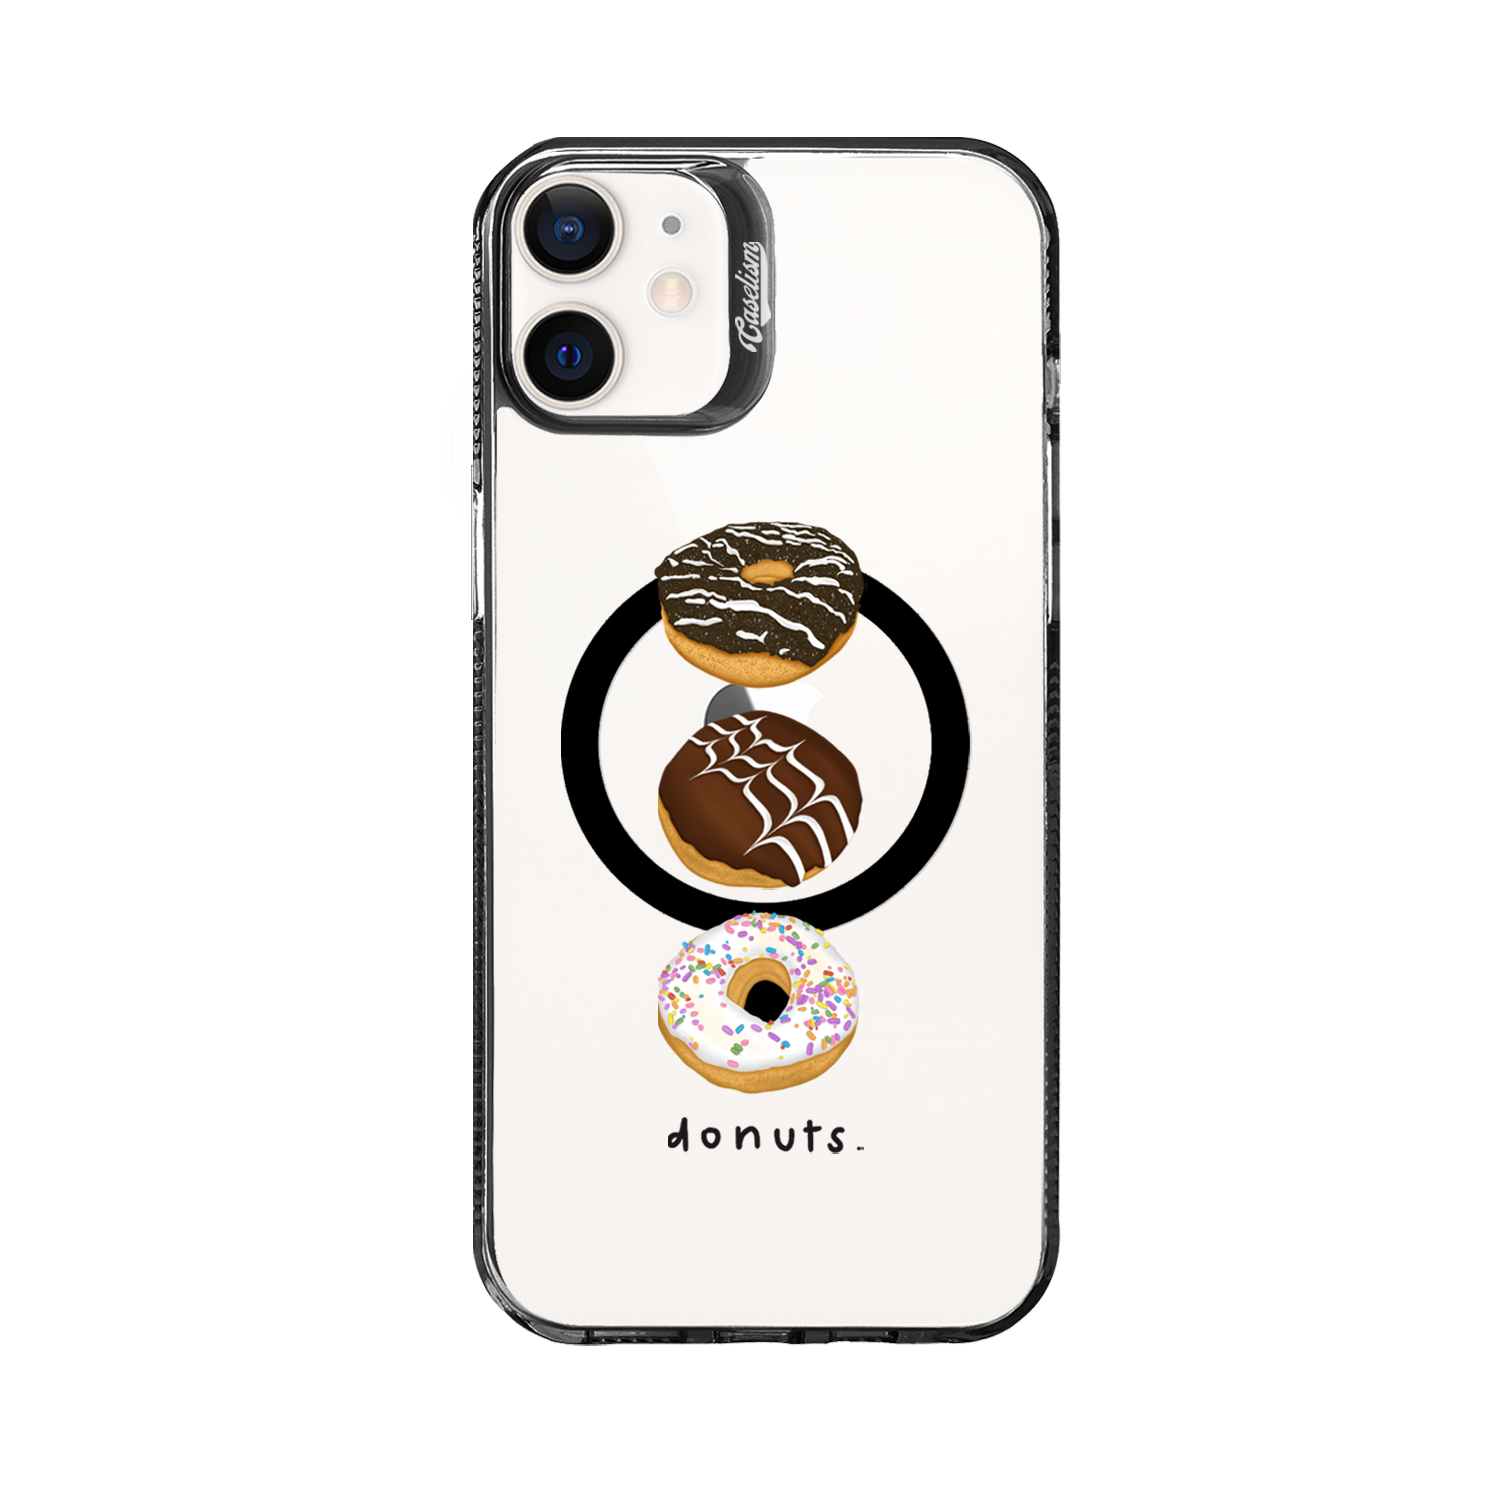 AWOB002 - ColorLite Case for iPhone